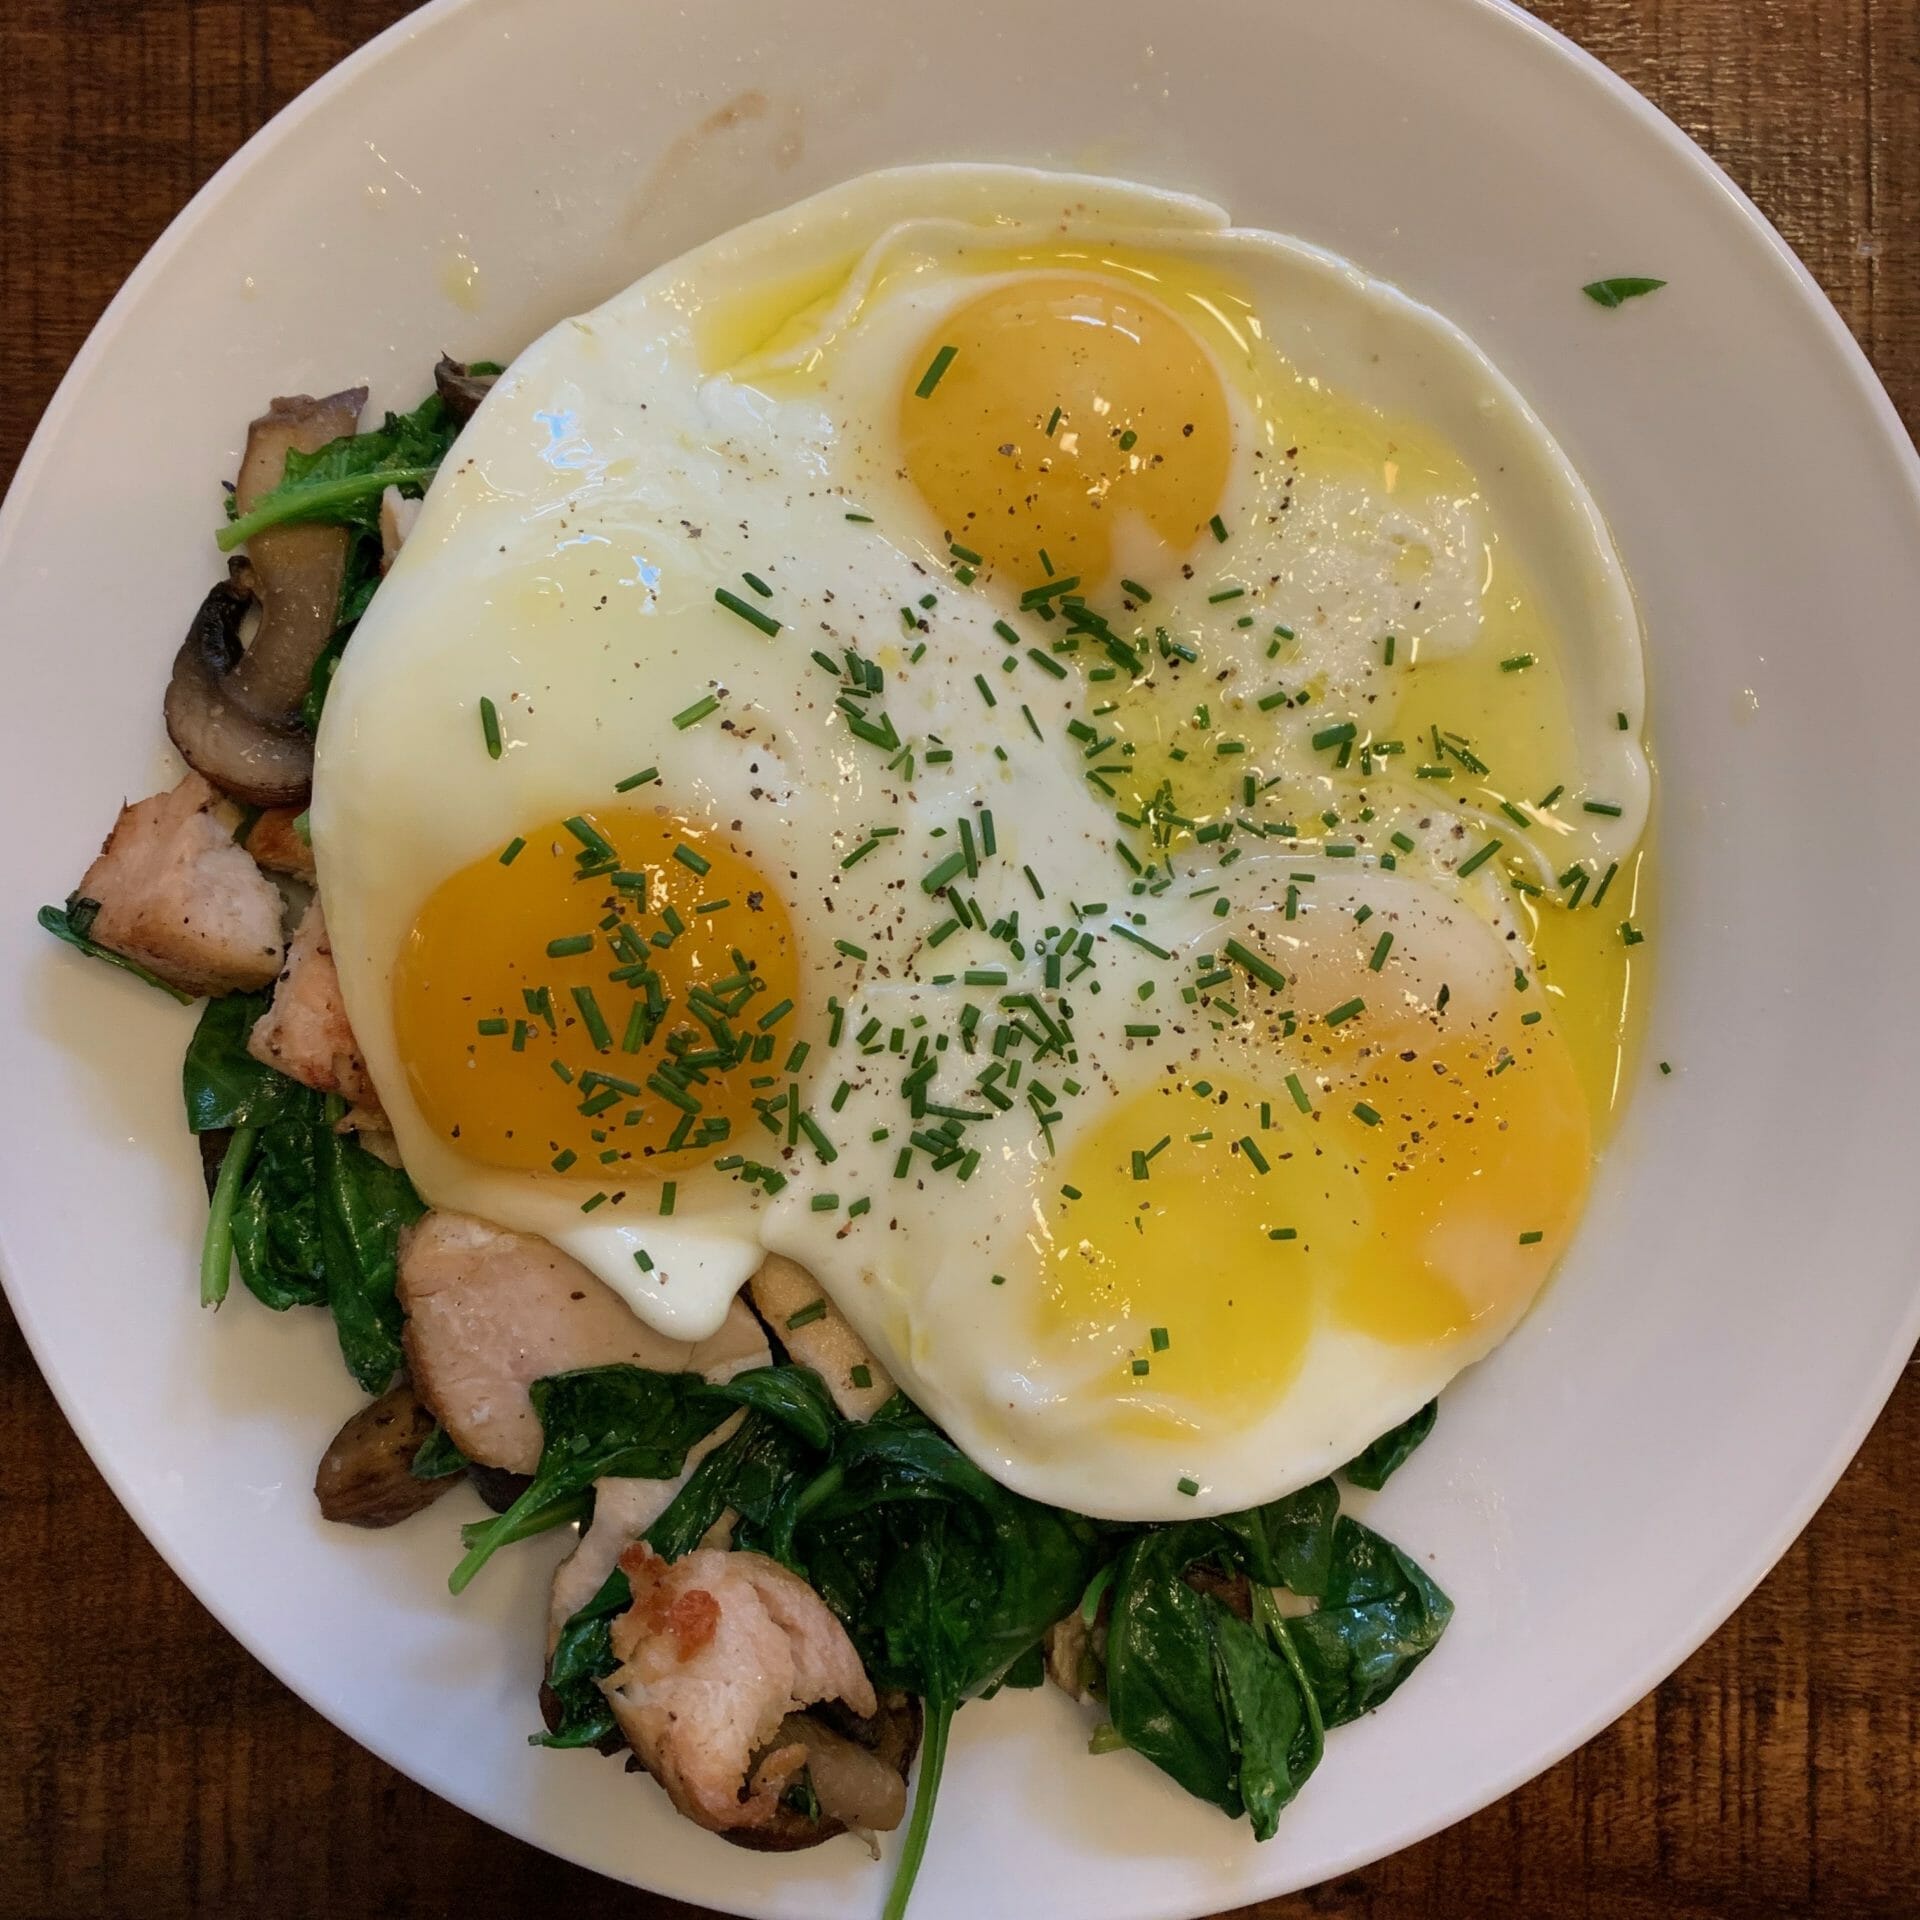 Fried eggs over grilled chicken, spinach and mushrooms